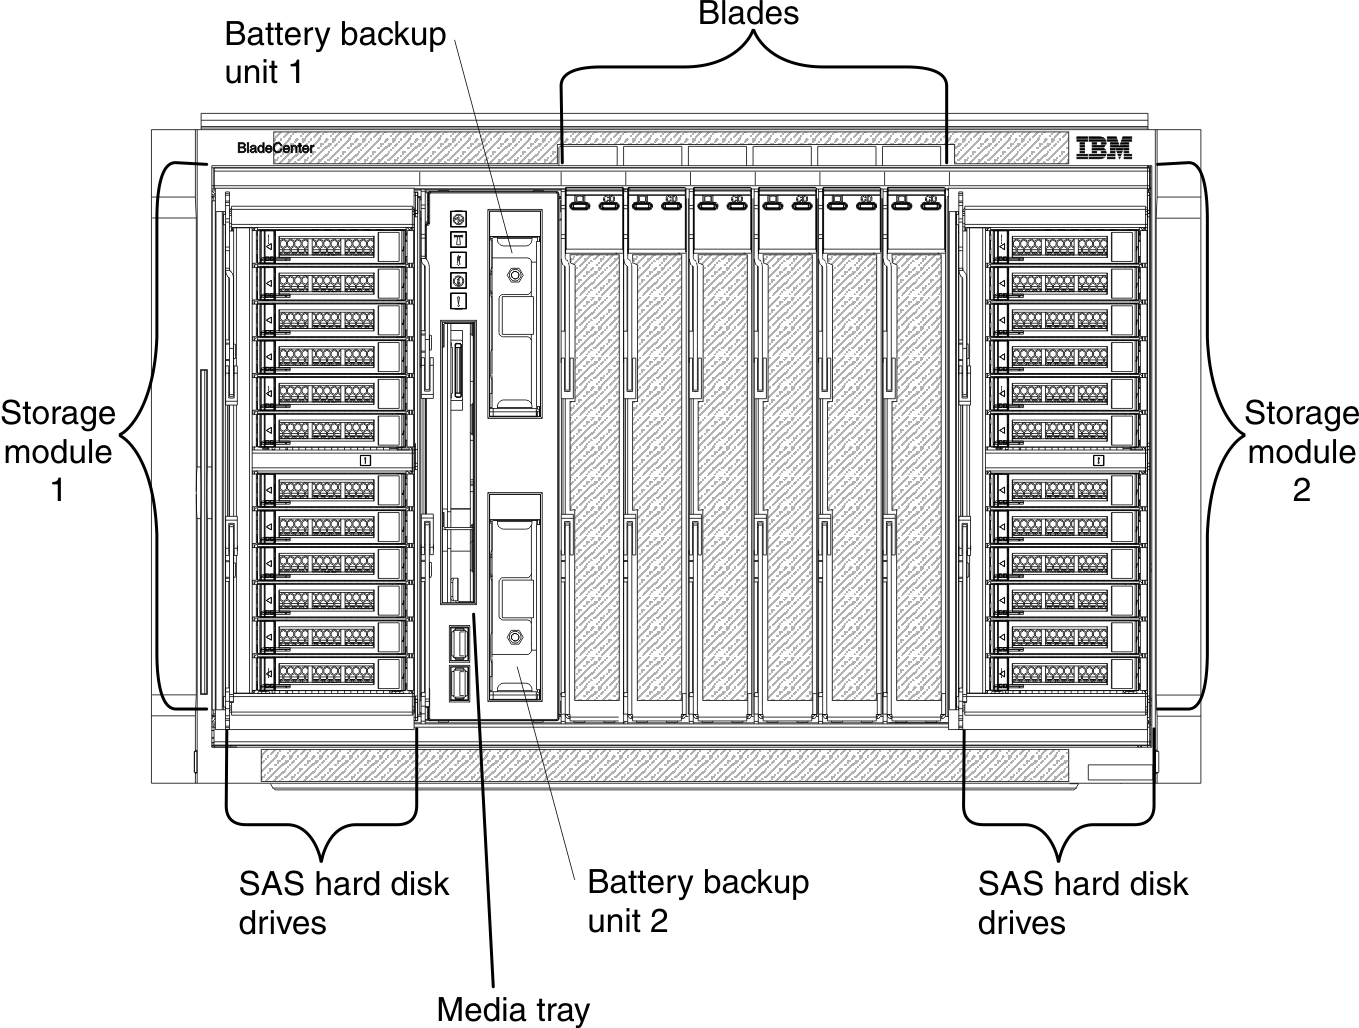 Diagram showing the front of the BladeCenter S chassis when 2.5-inch disk drives are used.